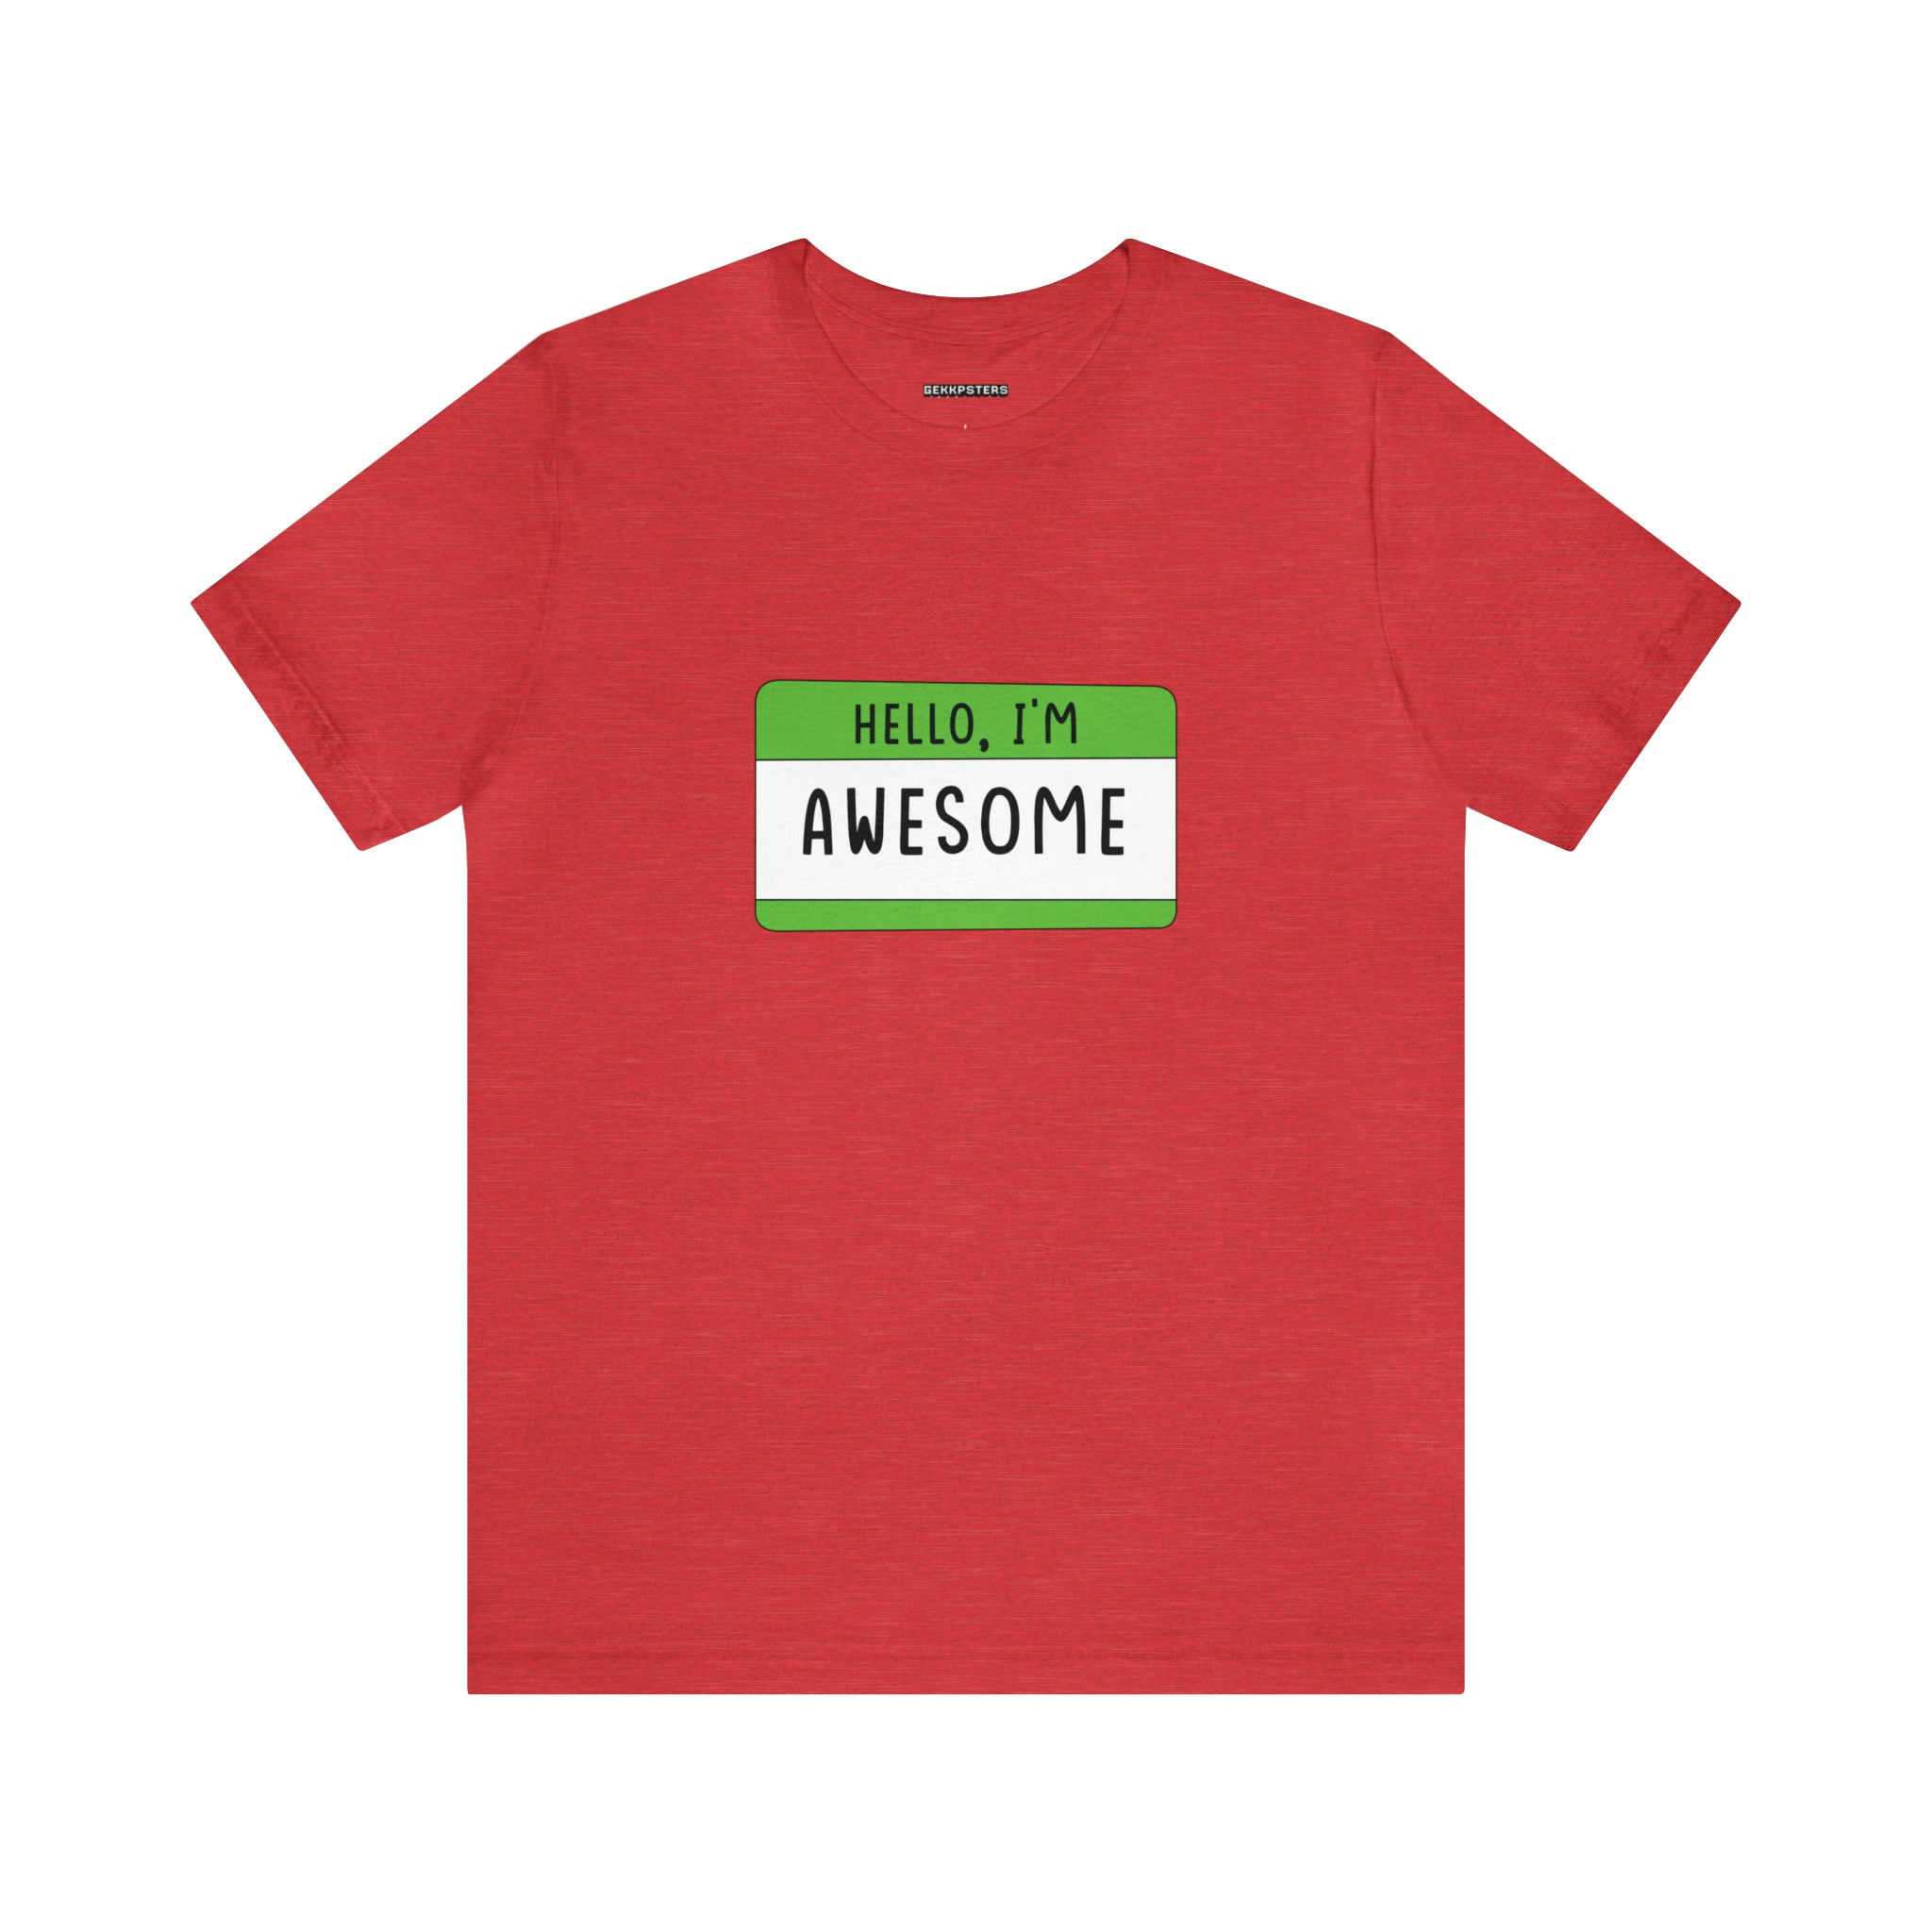 Red Hello, I'm Awesome T-Shirt with a green name tag sticker on the chest area that reads "hello, I'm awesome" in white and black text, ideal for gamers.